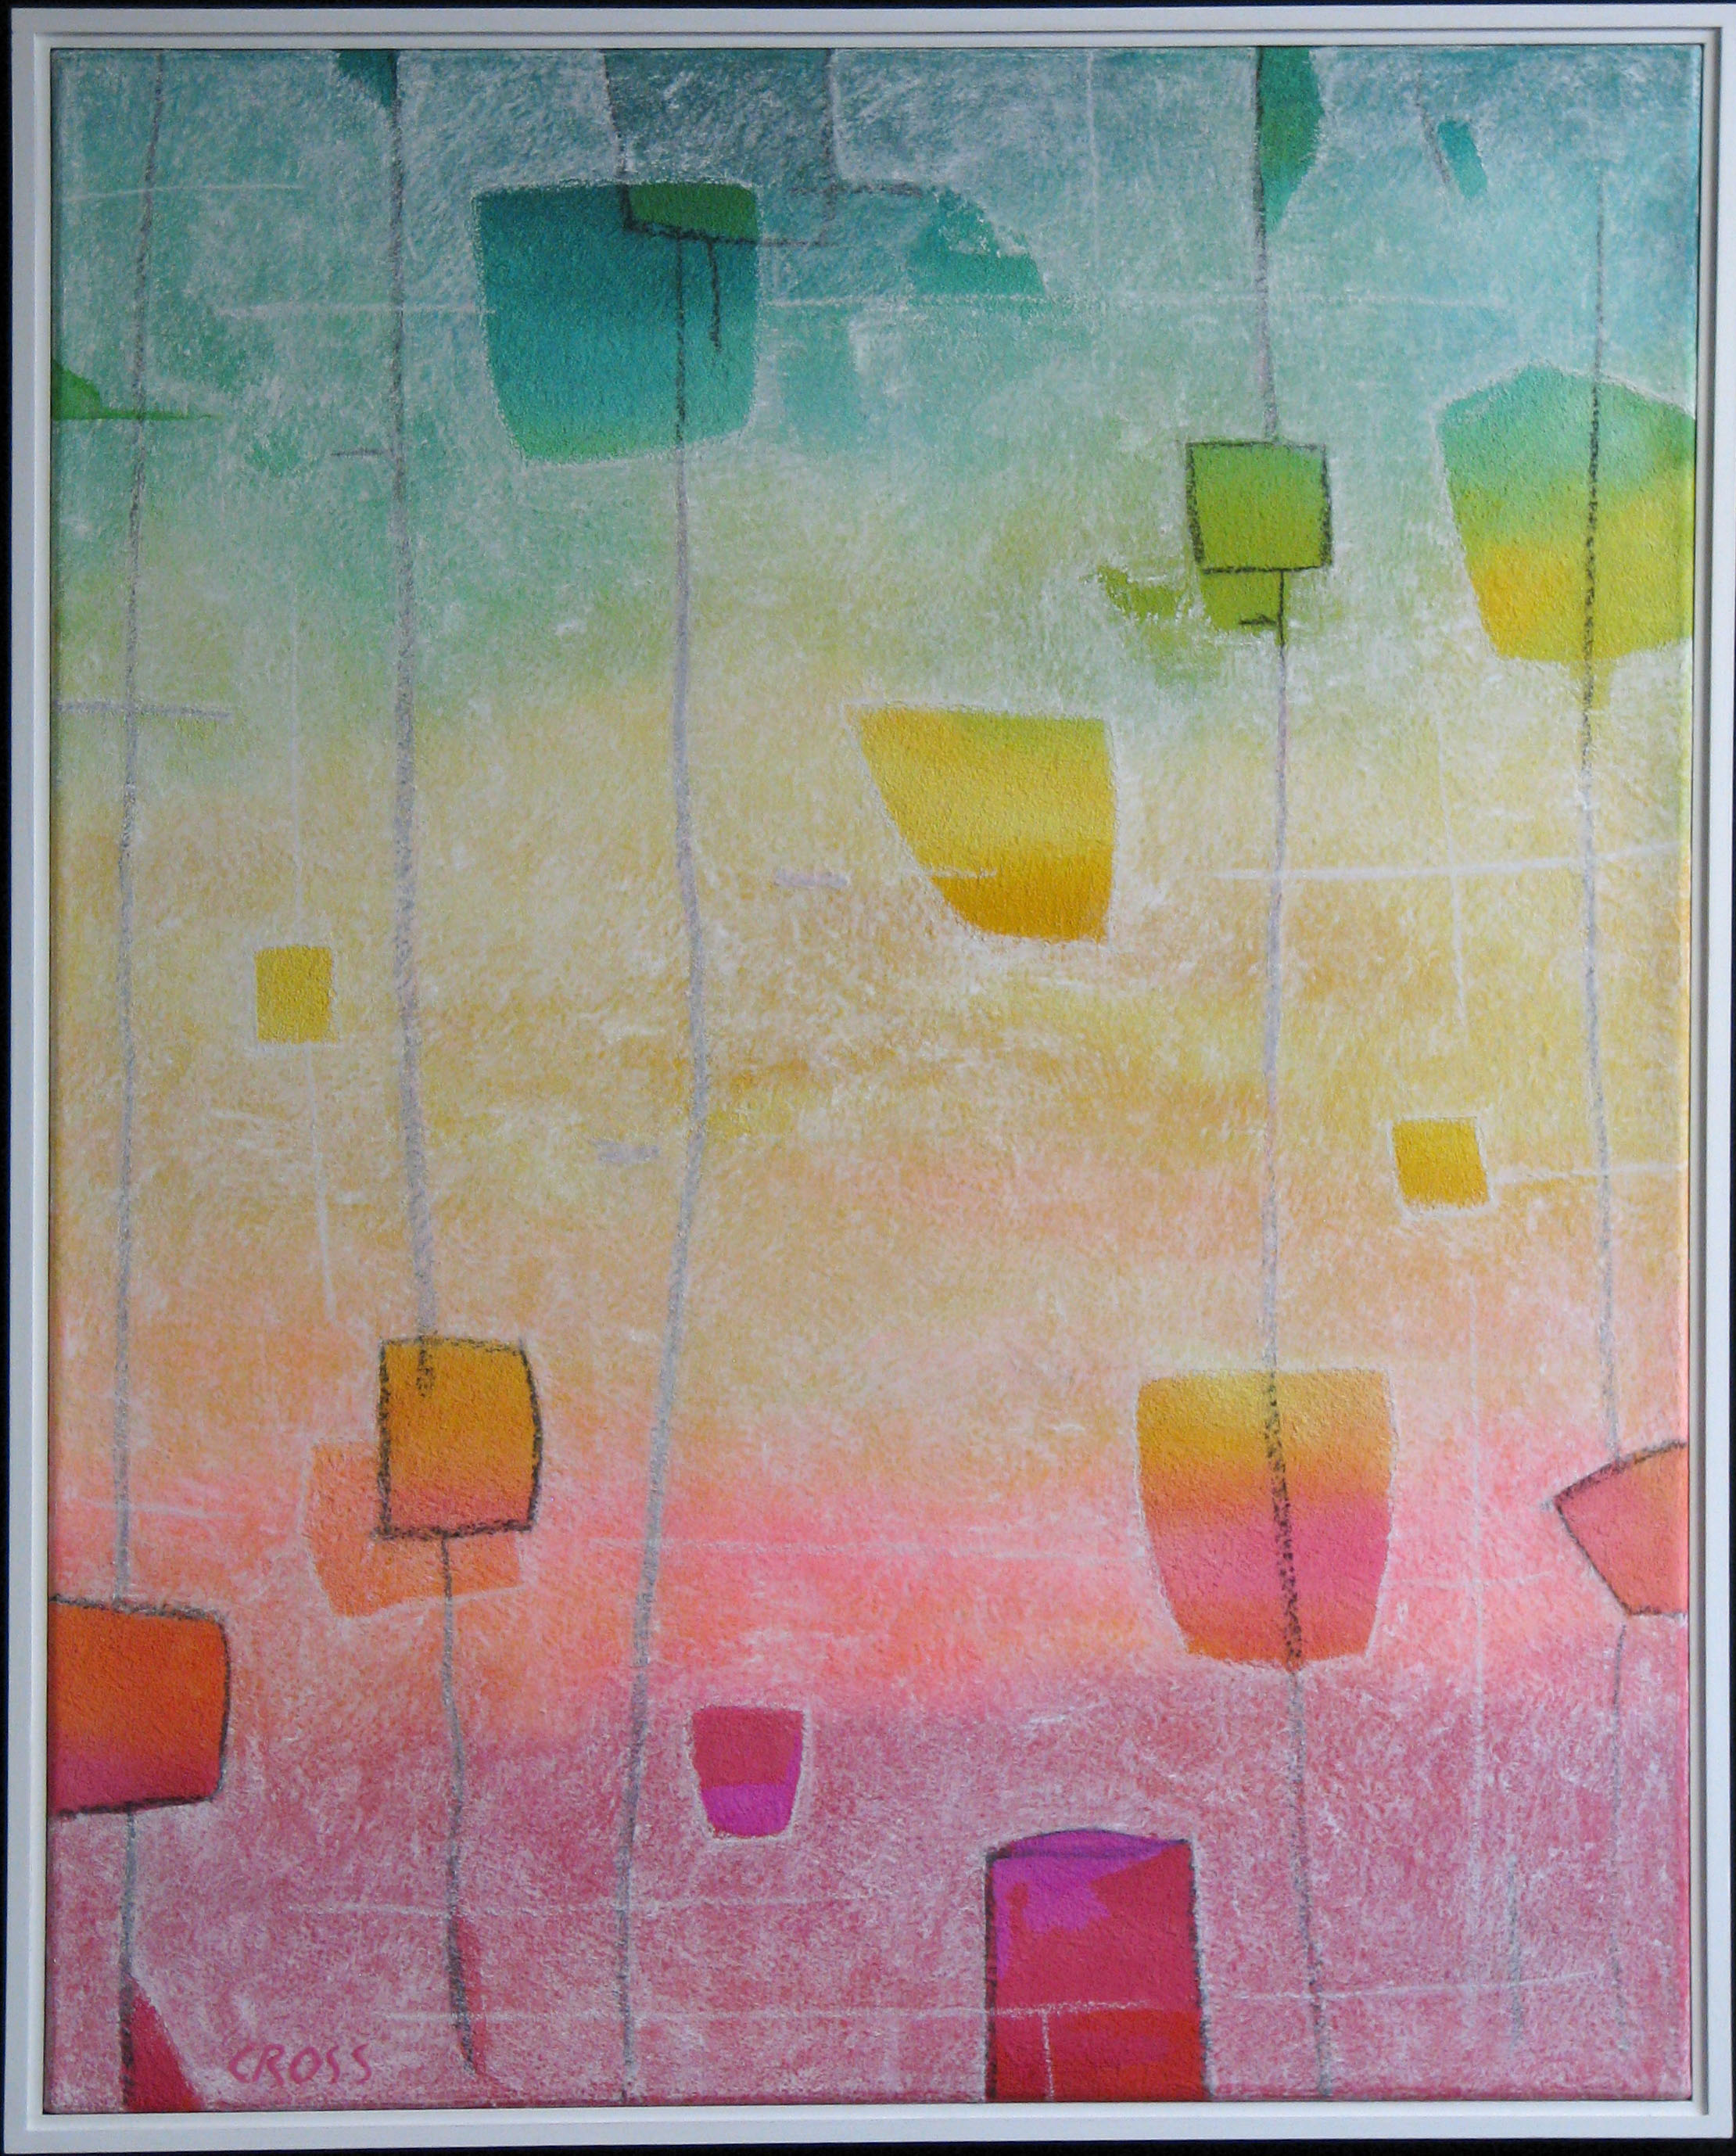 PAPER LANTERN VIII, acrylic and mixed media on canvas, 30 x 24 in